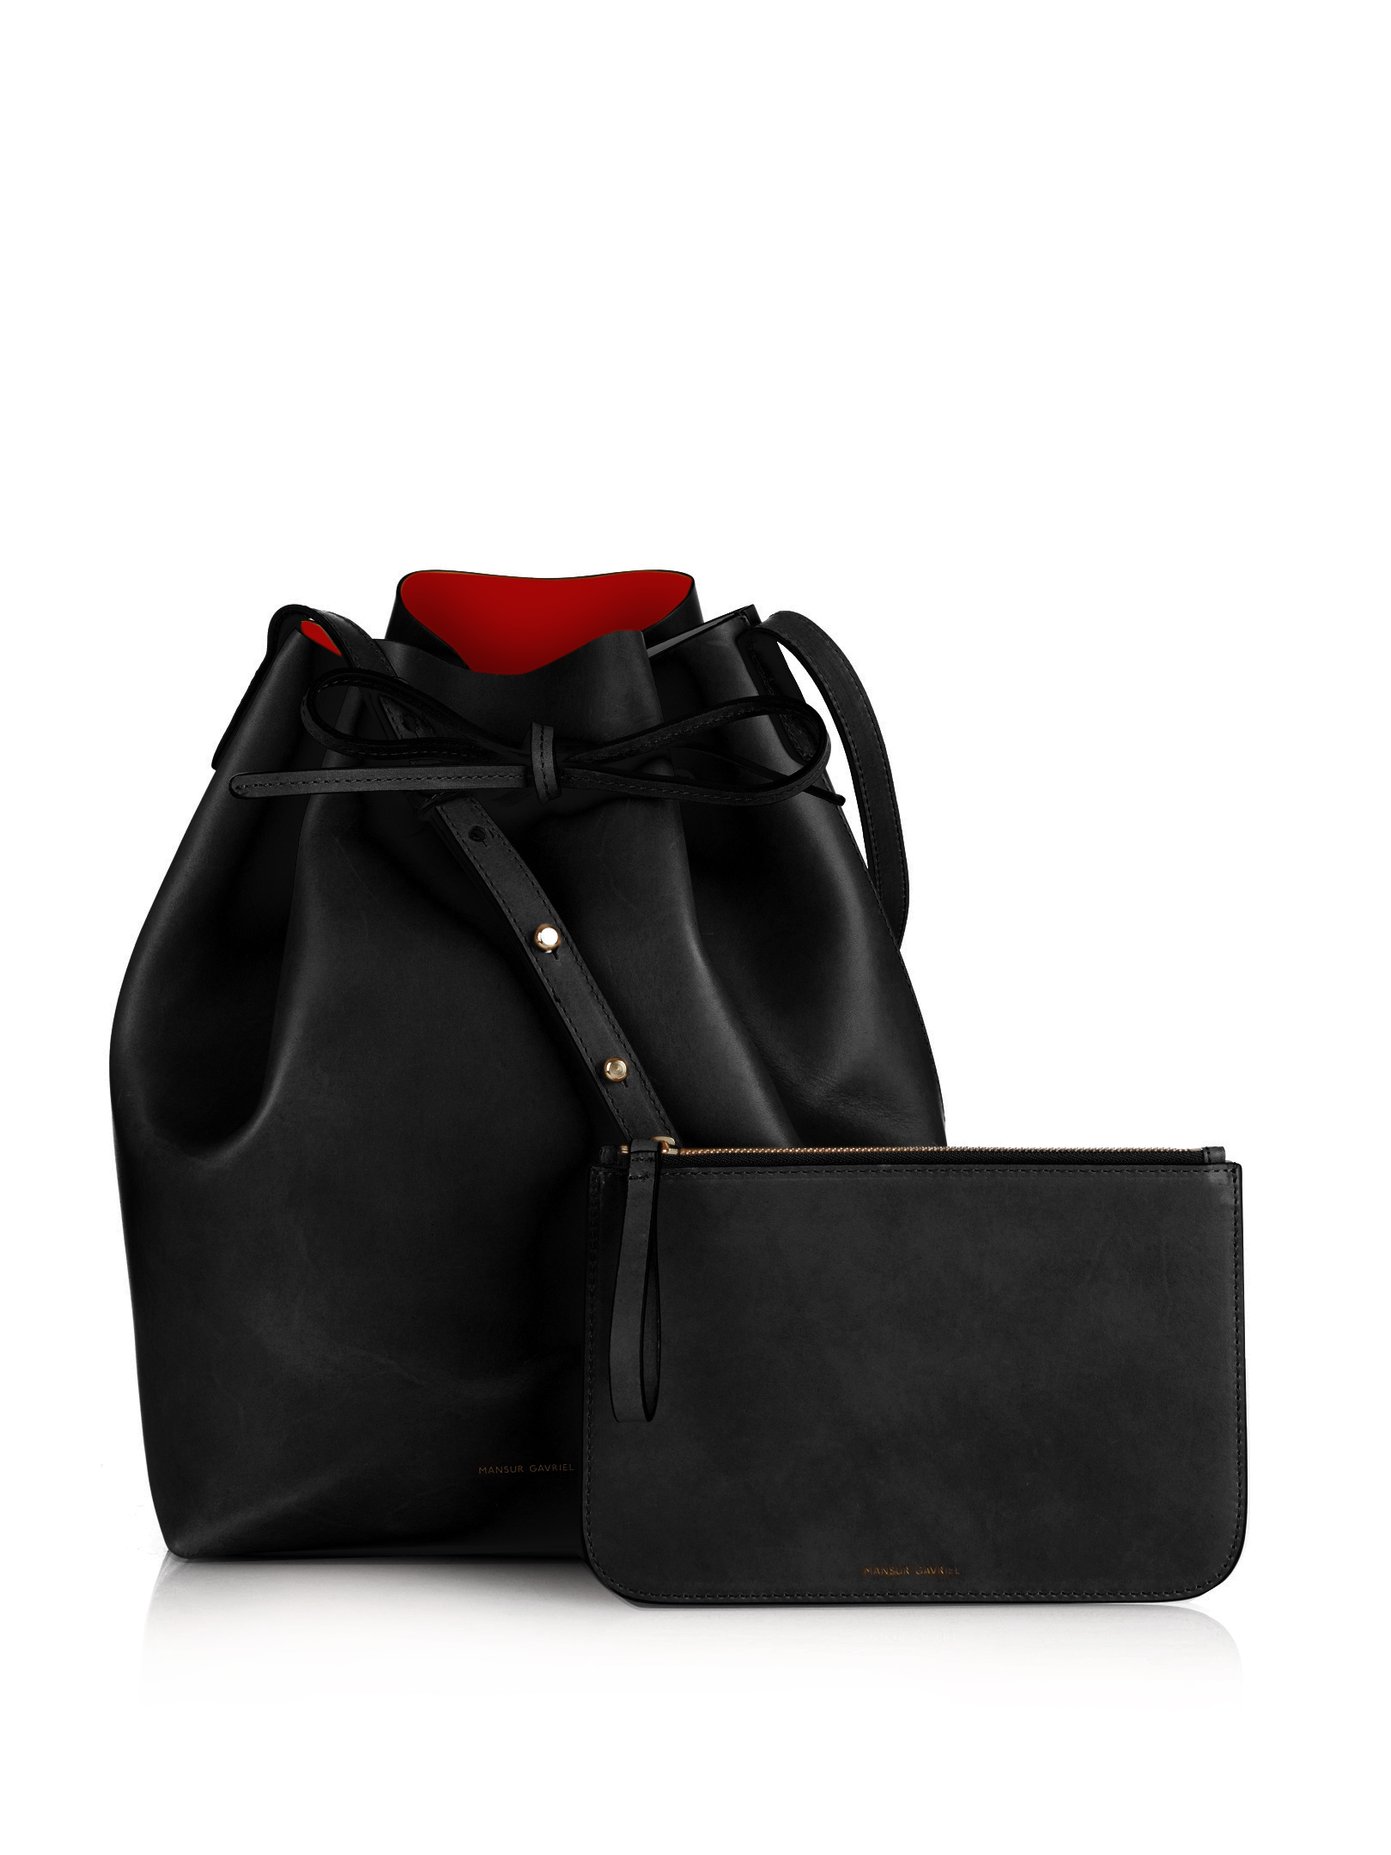 black bucket bag with red lining